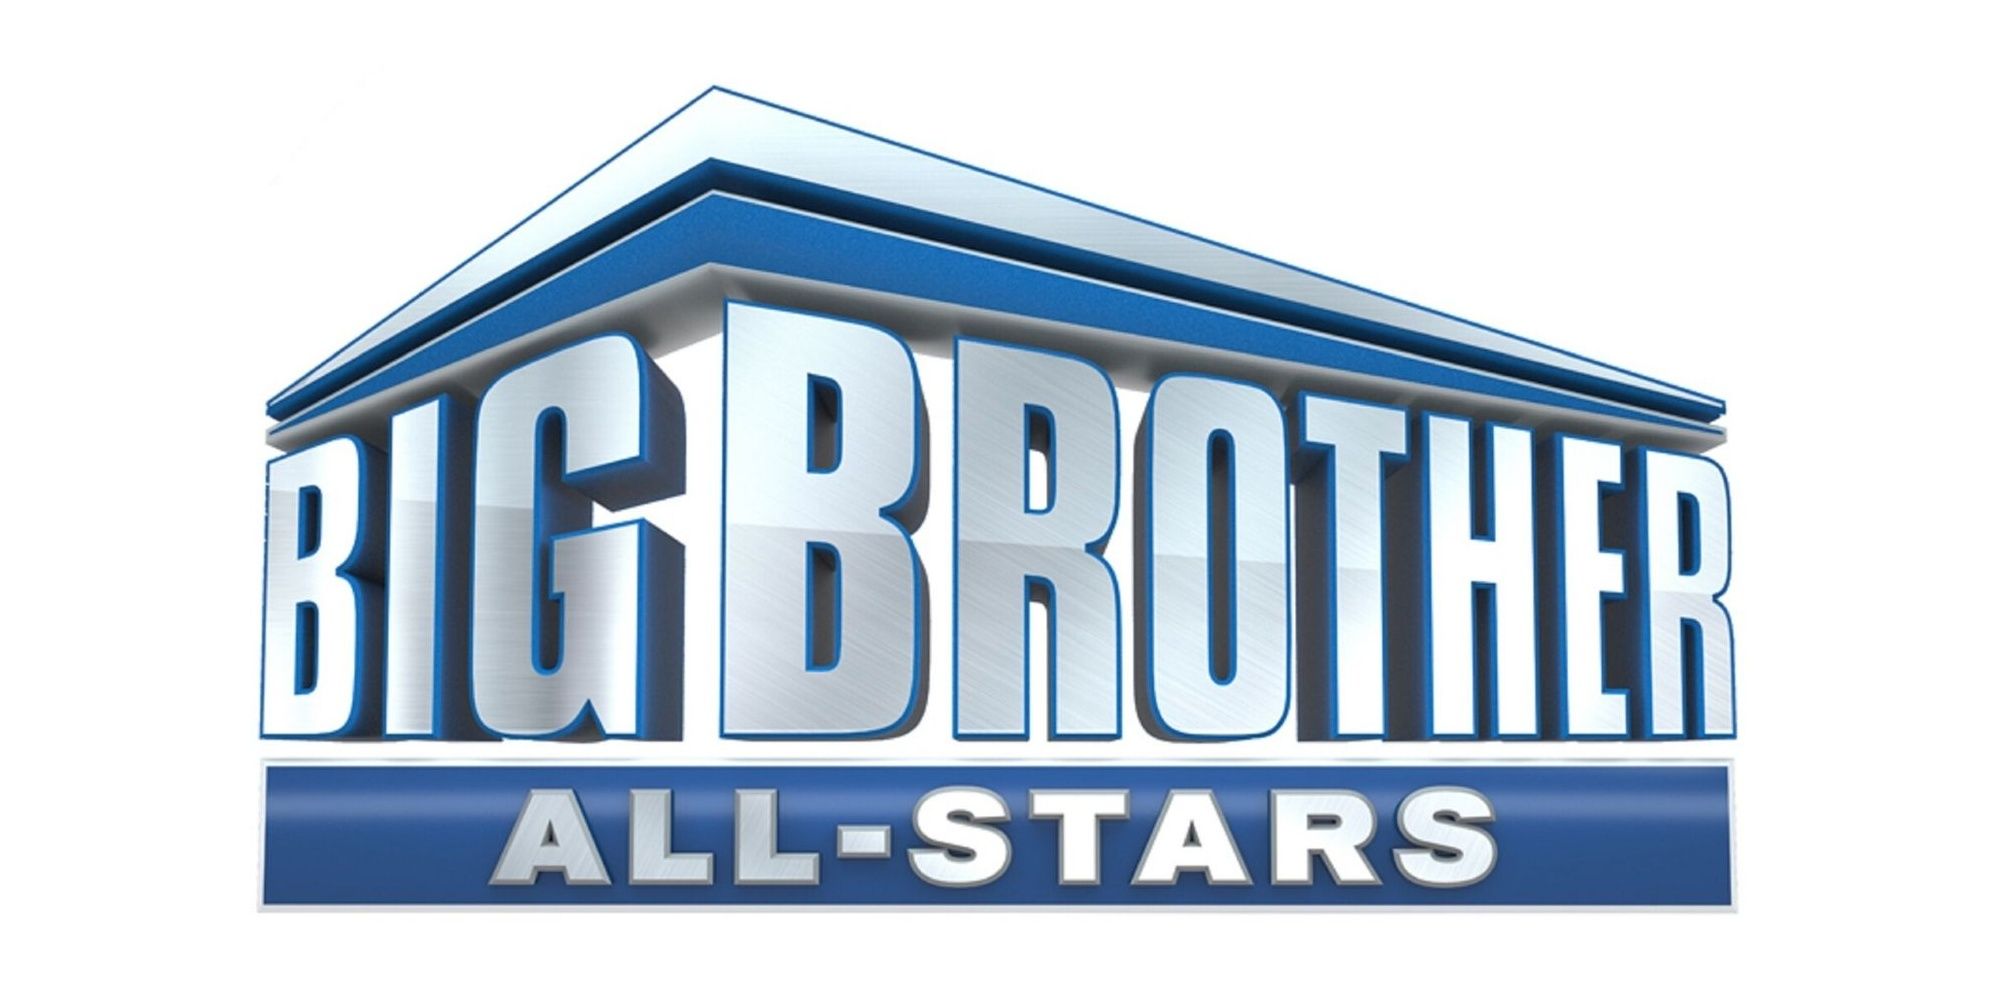 The logo for Big Brother All Stars